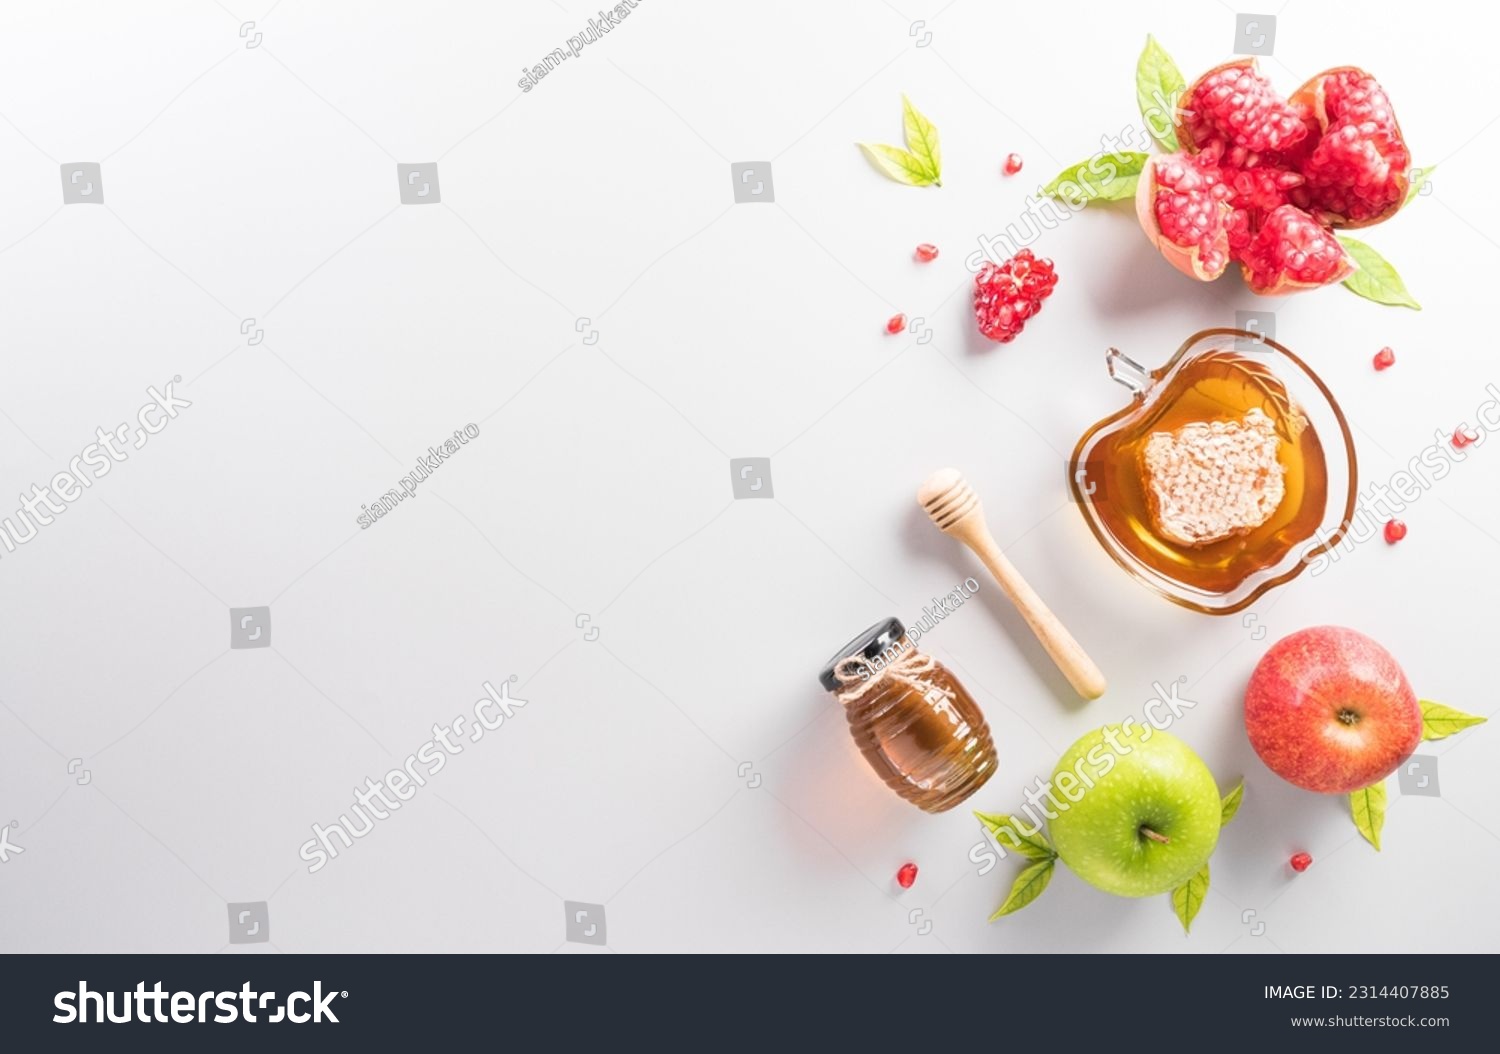 Rosh hashanah (jewish New Year holiday), Concept of traditional or religion symbols on white background. #2314407885